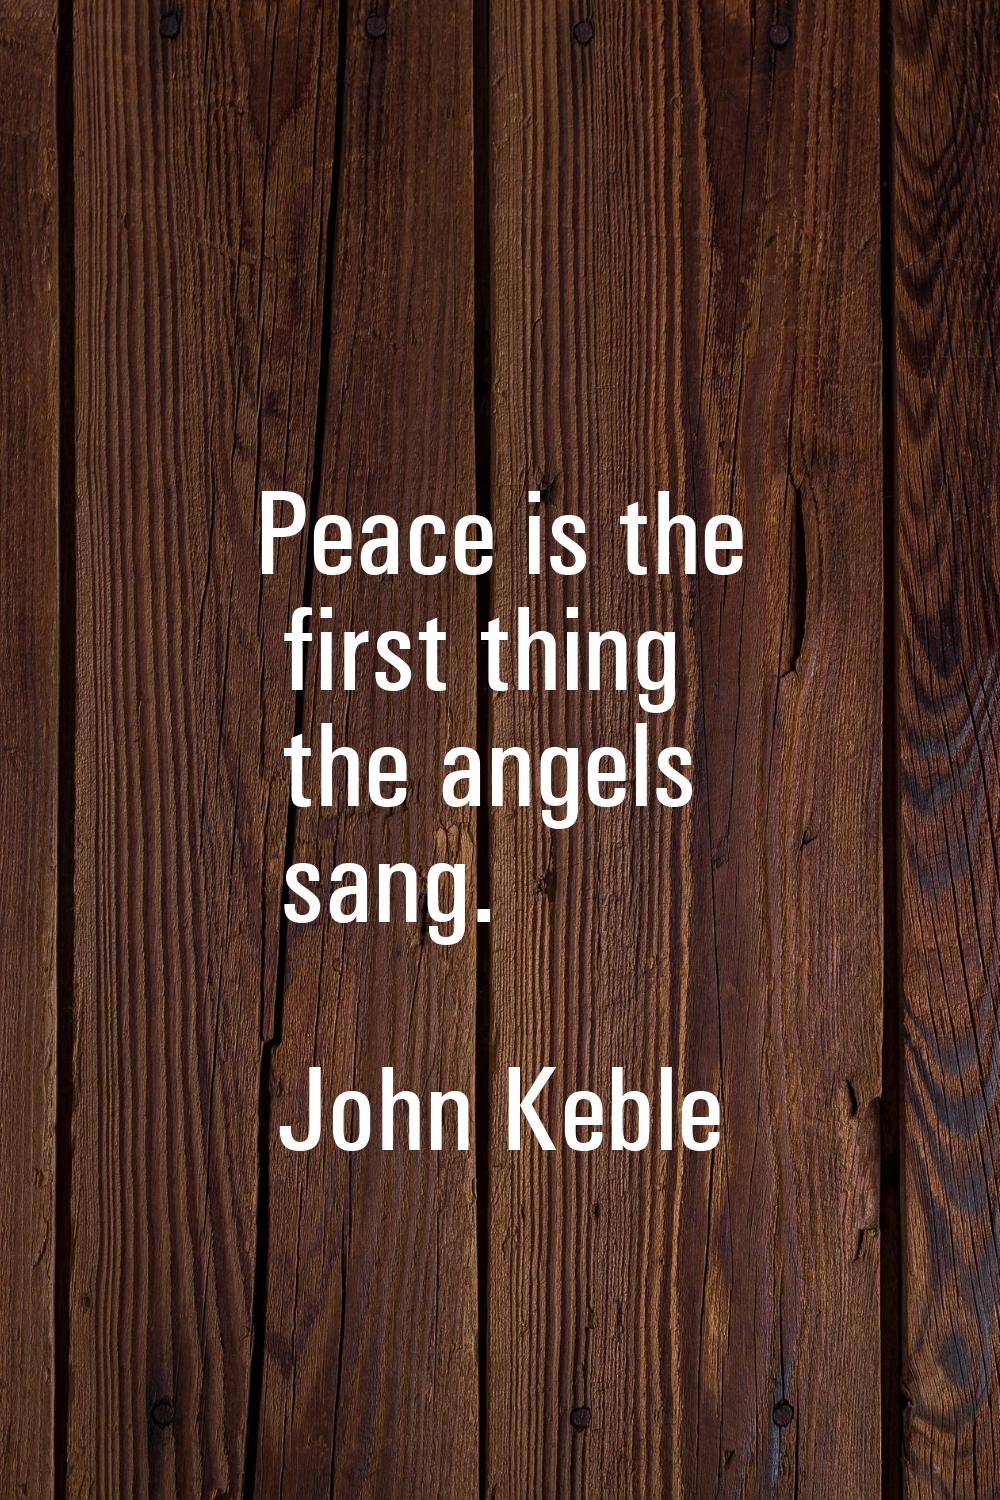 Peace is the first thing the angels sang.